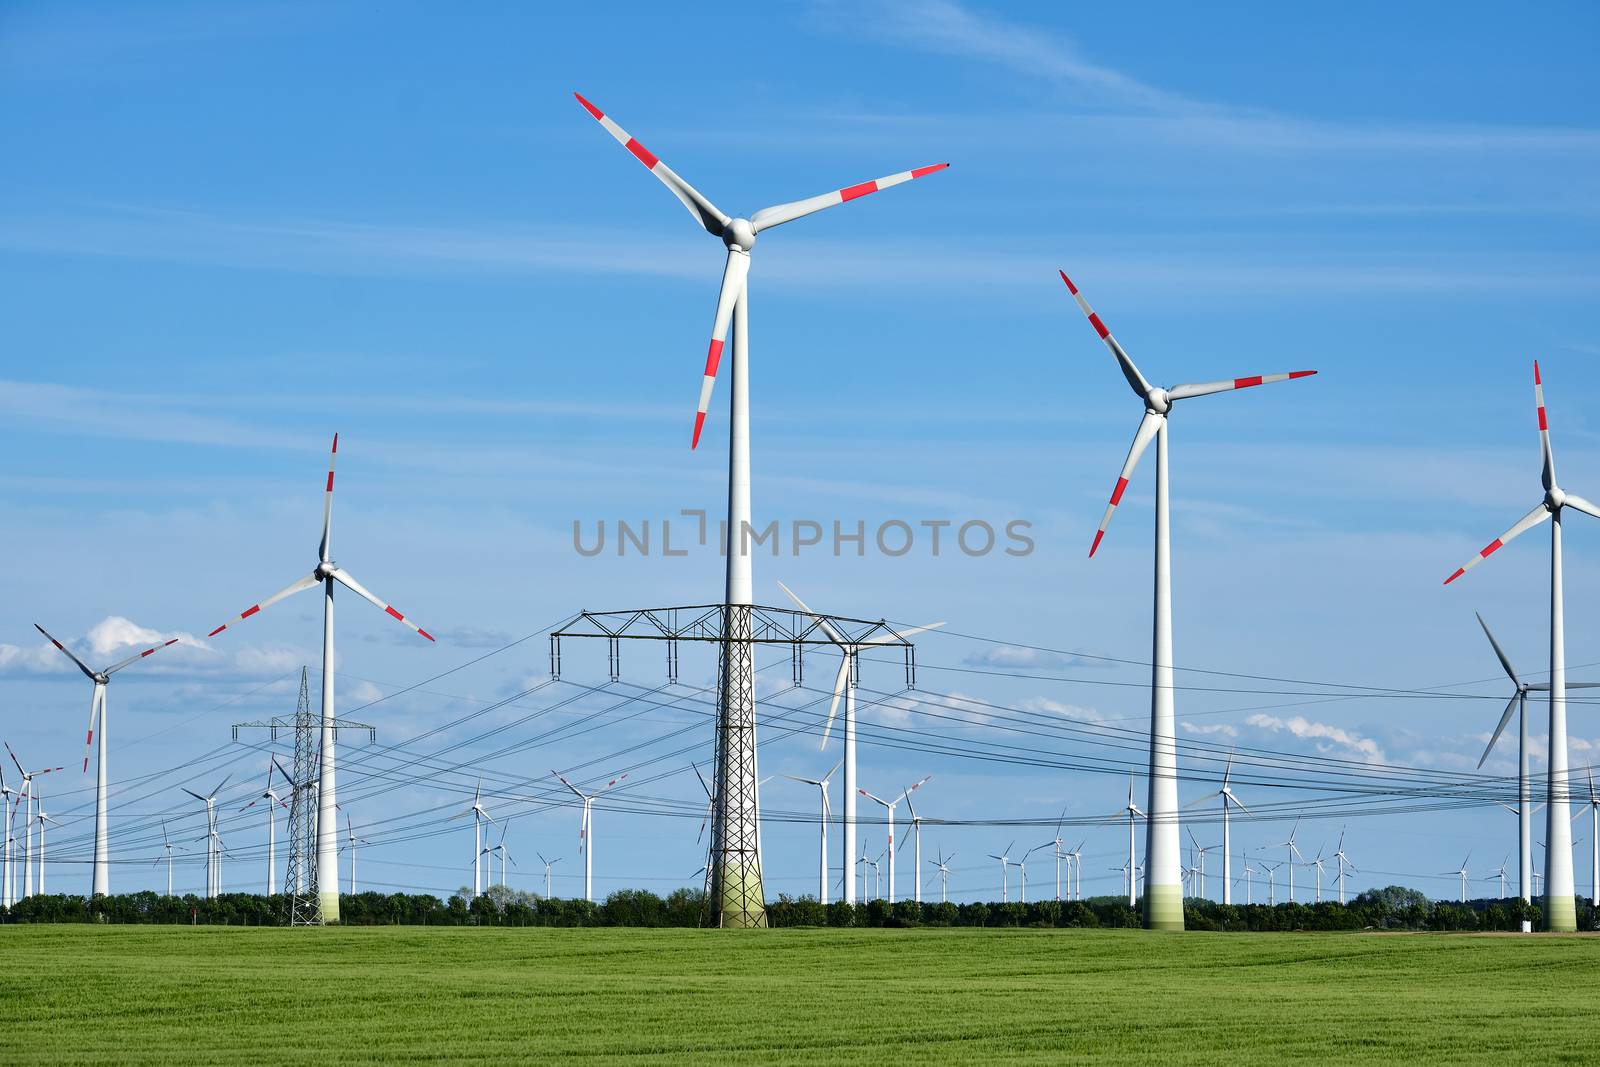 Overhead power lines and wind engines seen in Germany